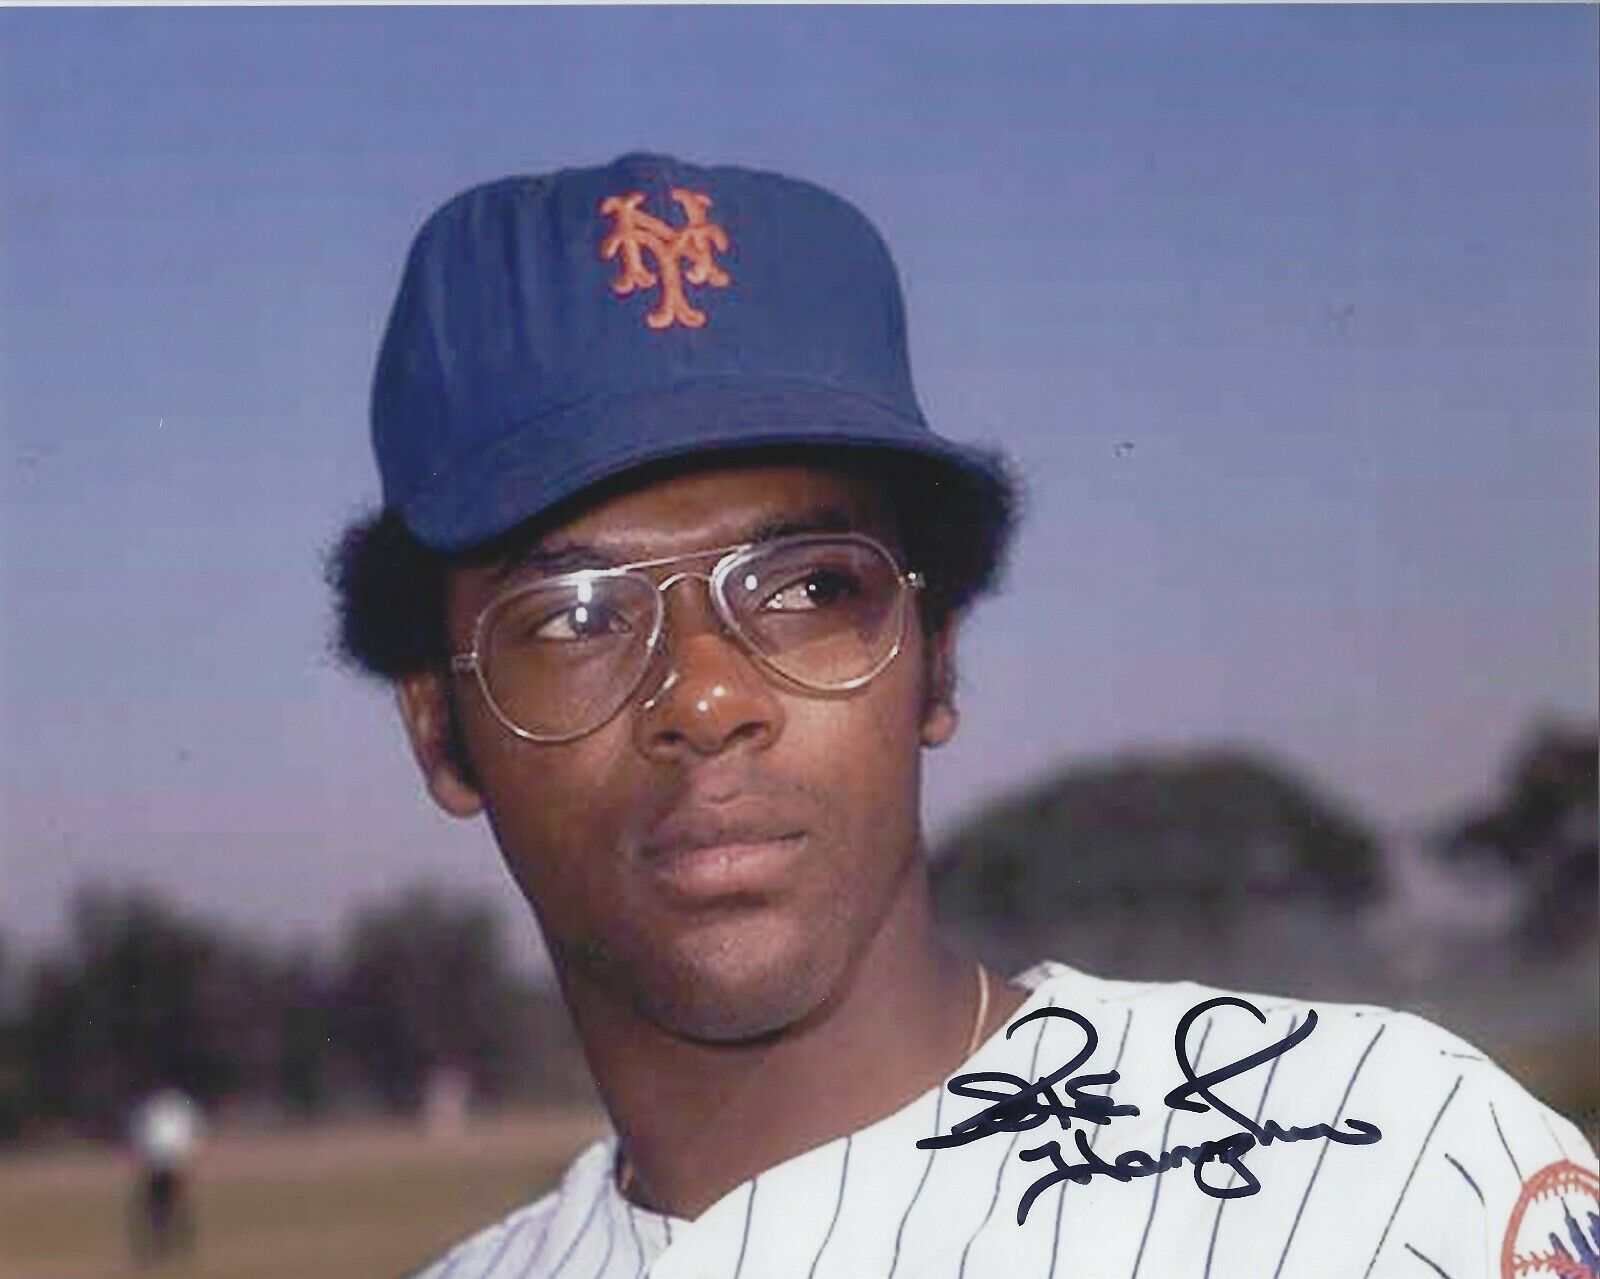 Signed 8x10 IKE HAMPTON NEW YORK METS Autographed Photo Poster painting - COA